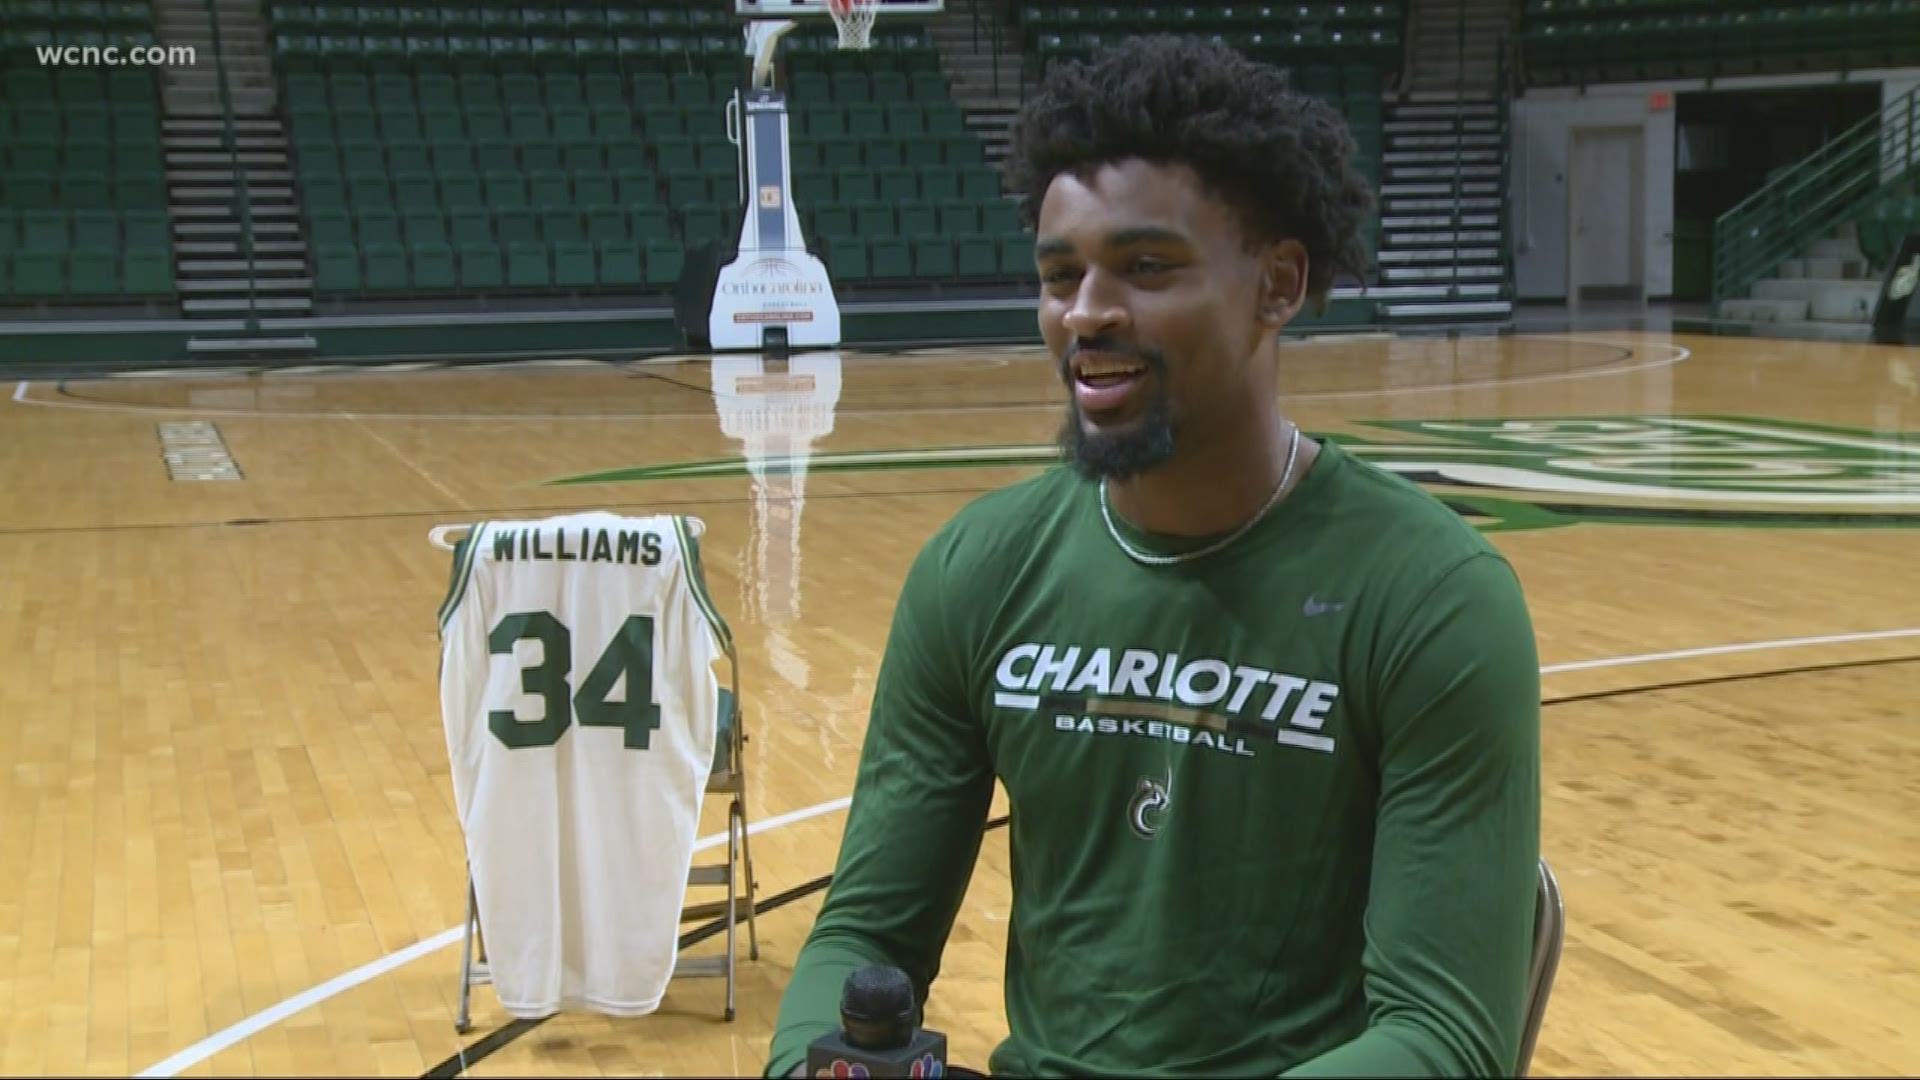 A UNC Charlotte freshman is following in his late father's footsteps by playing on the UNCC basketball team. His father was a fixture at the university.